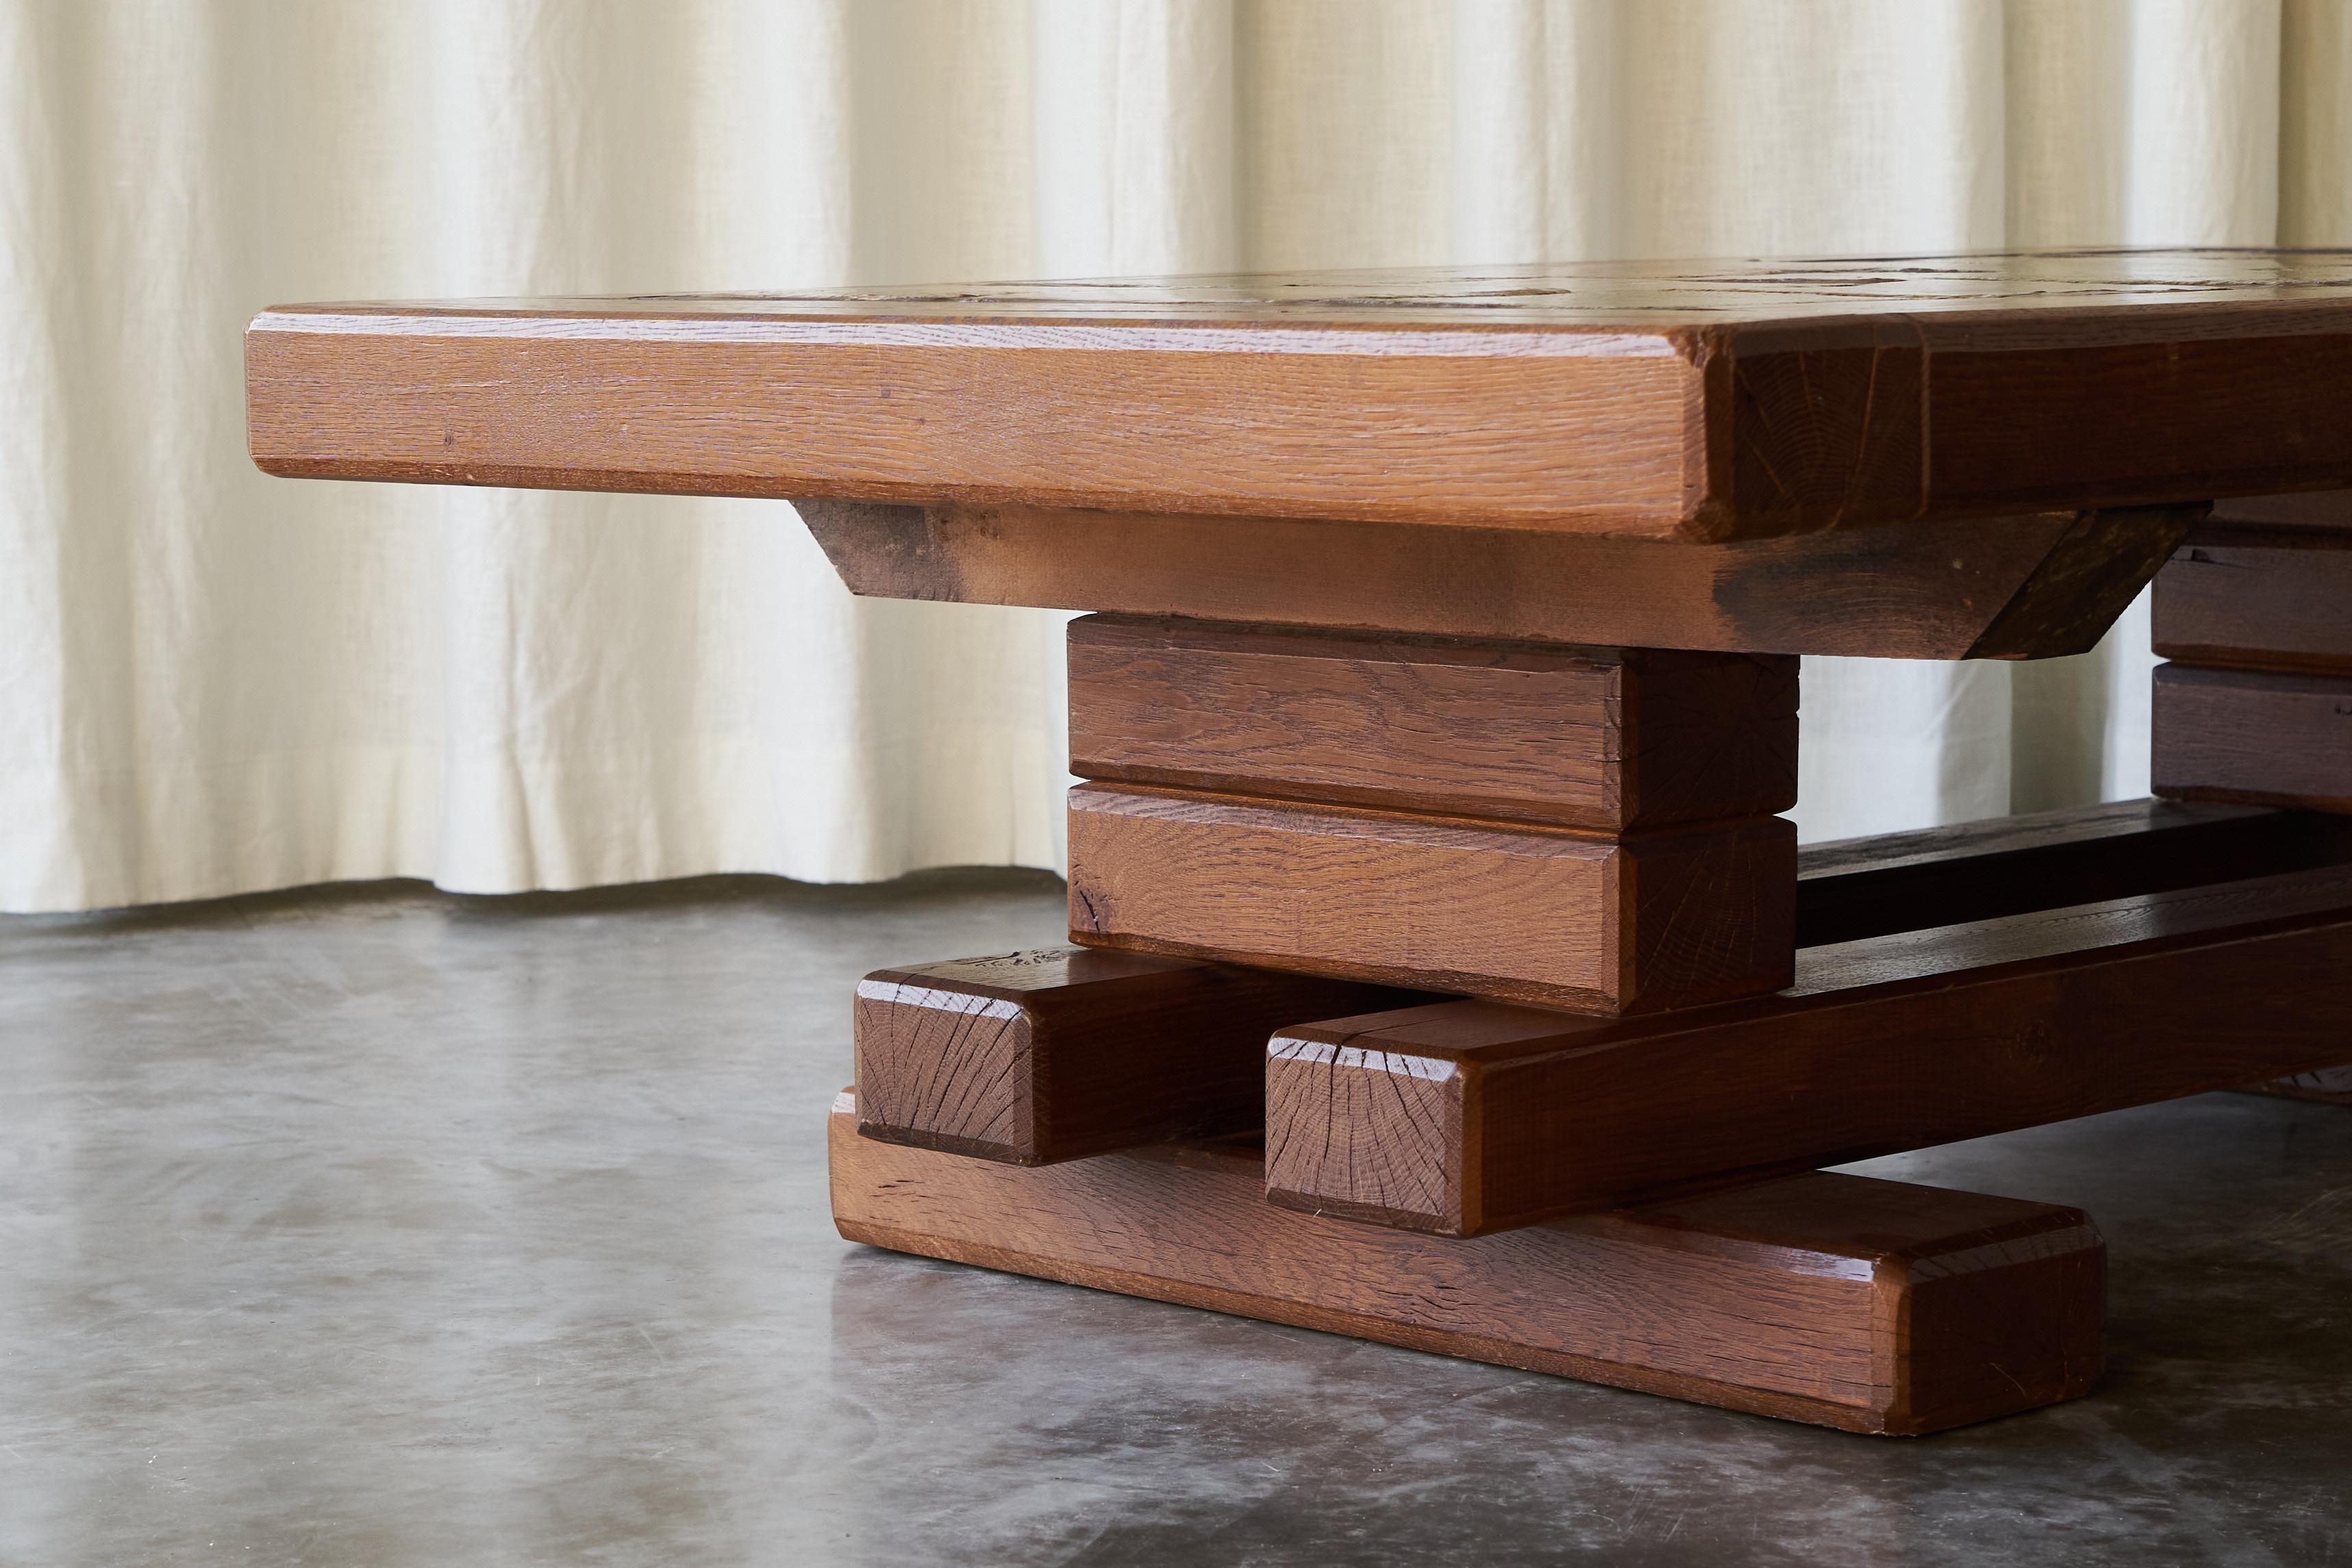 European Constructivist Coffee Table in Solid Oak and Ceramic 1960s For Sale